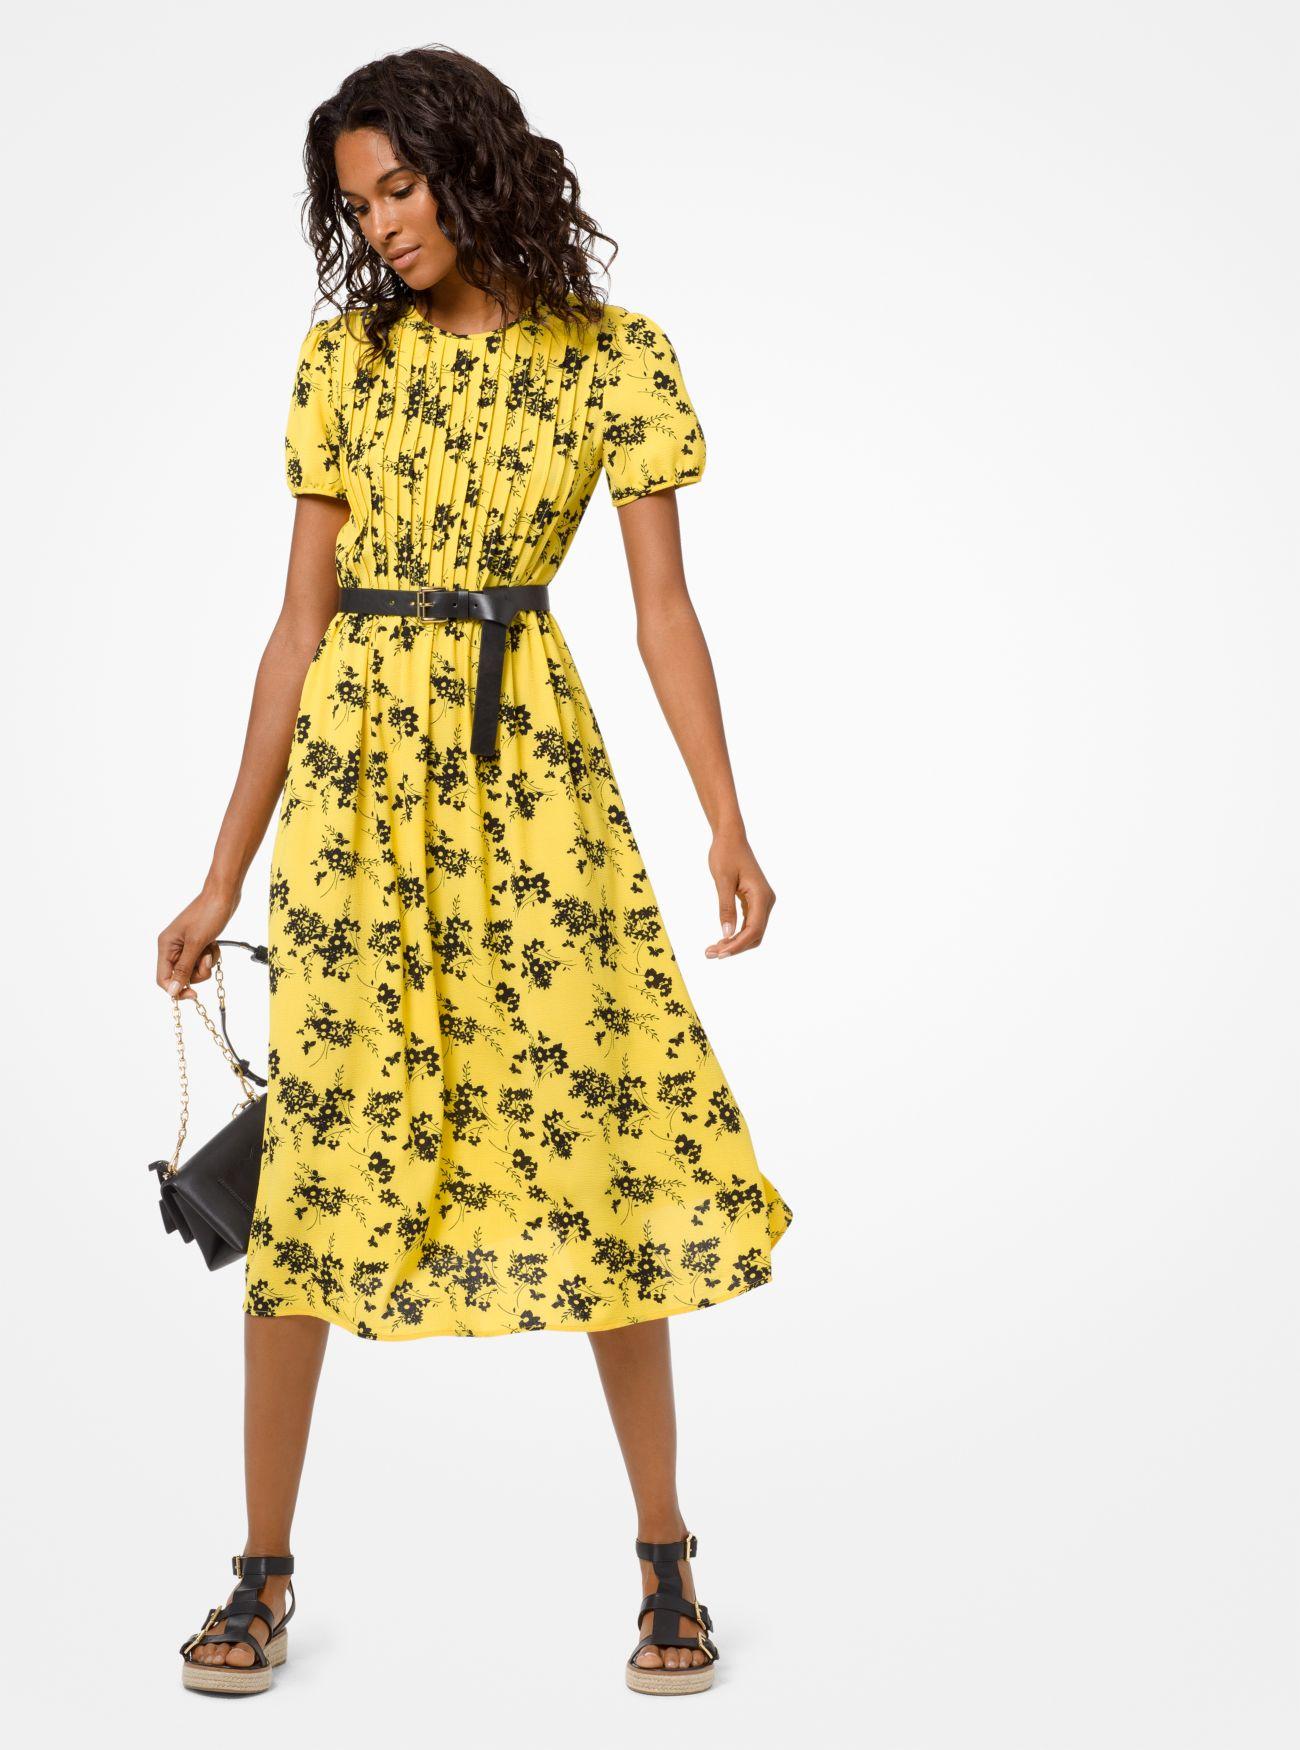 Michael Kors Synthetic Botanical Pintucked Dress in Golden (Yellow) - Lyst